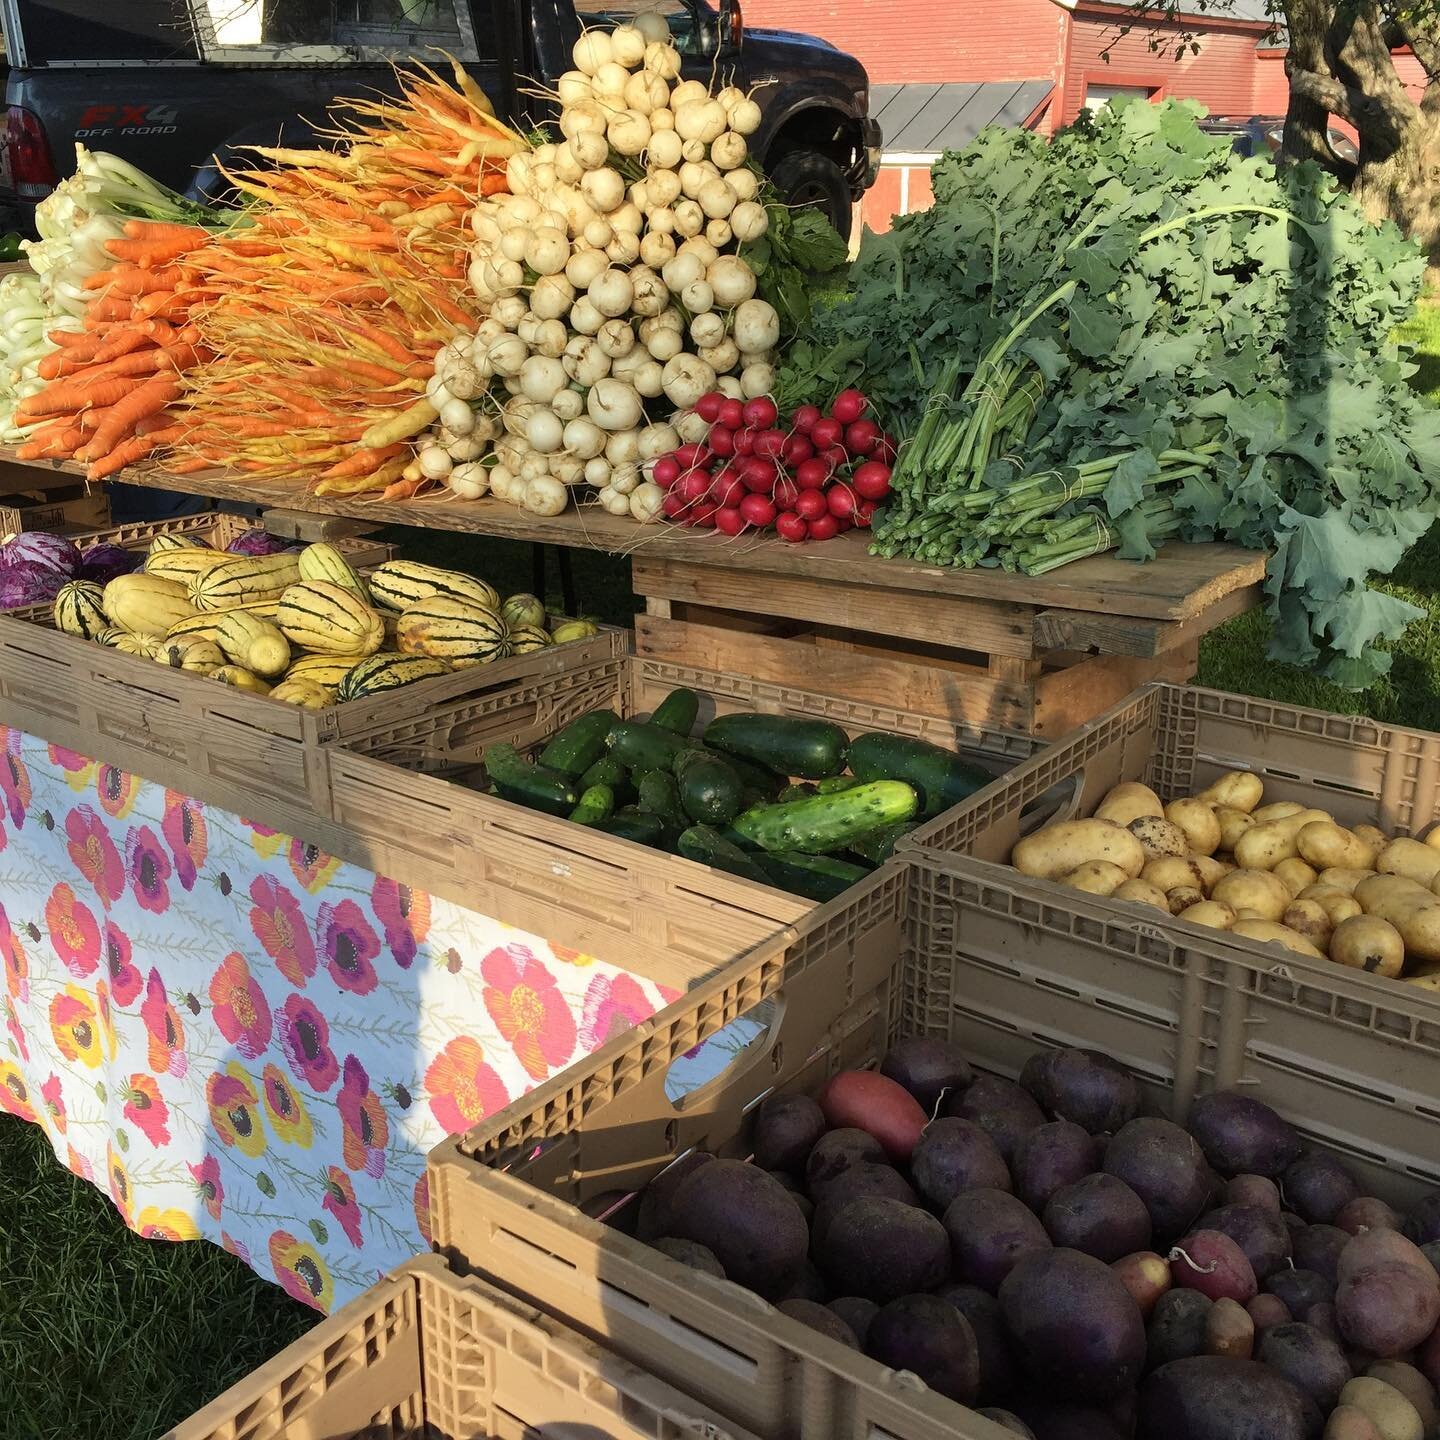 Last market this coming Saturday (10/10)! Come pick up some autumn bounty from our farmers, great prepared foods and crafts - don&rsquo;t miss it! Pre-ordering and pre-paying ensures you won&rsquo;t miss out on various items at market, but it isn&rsq